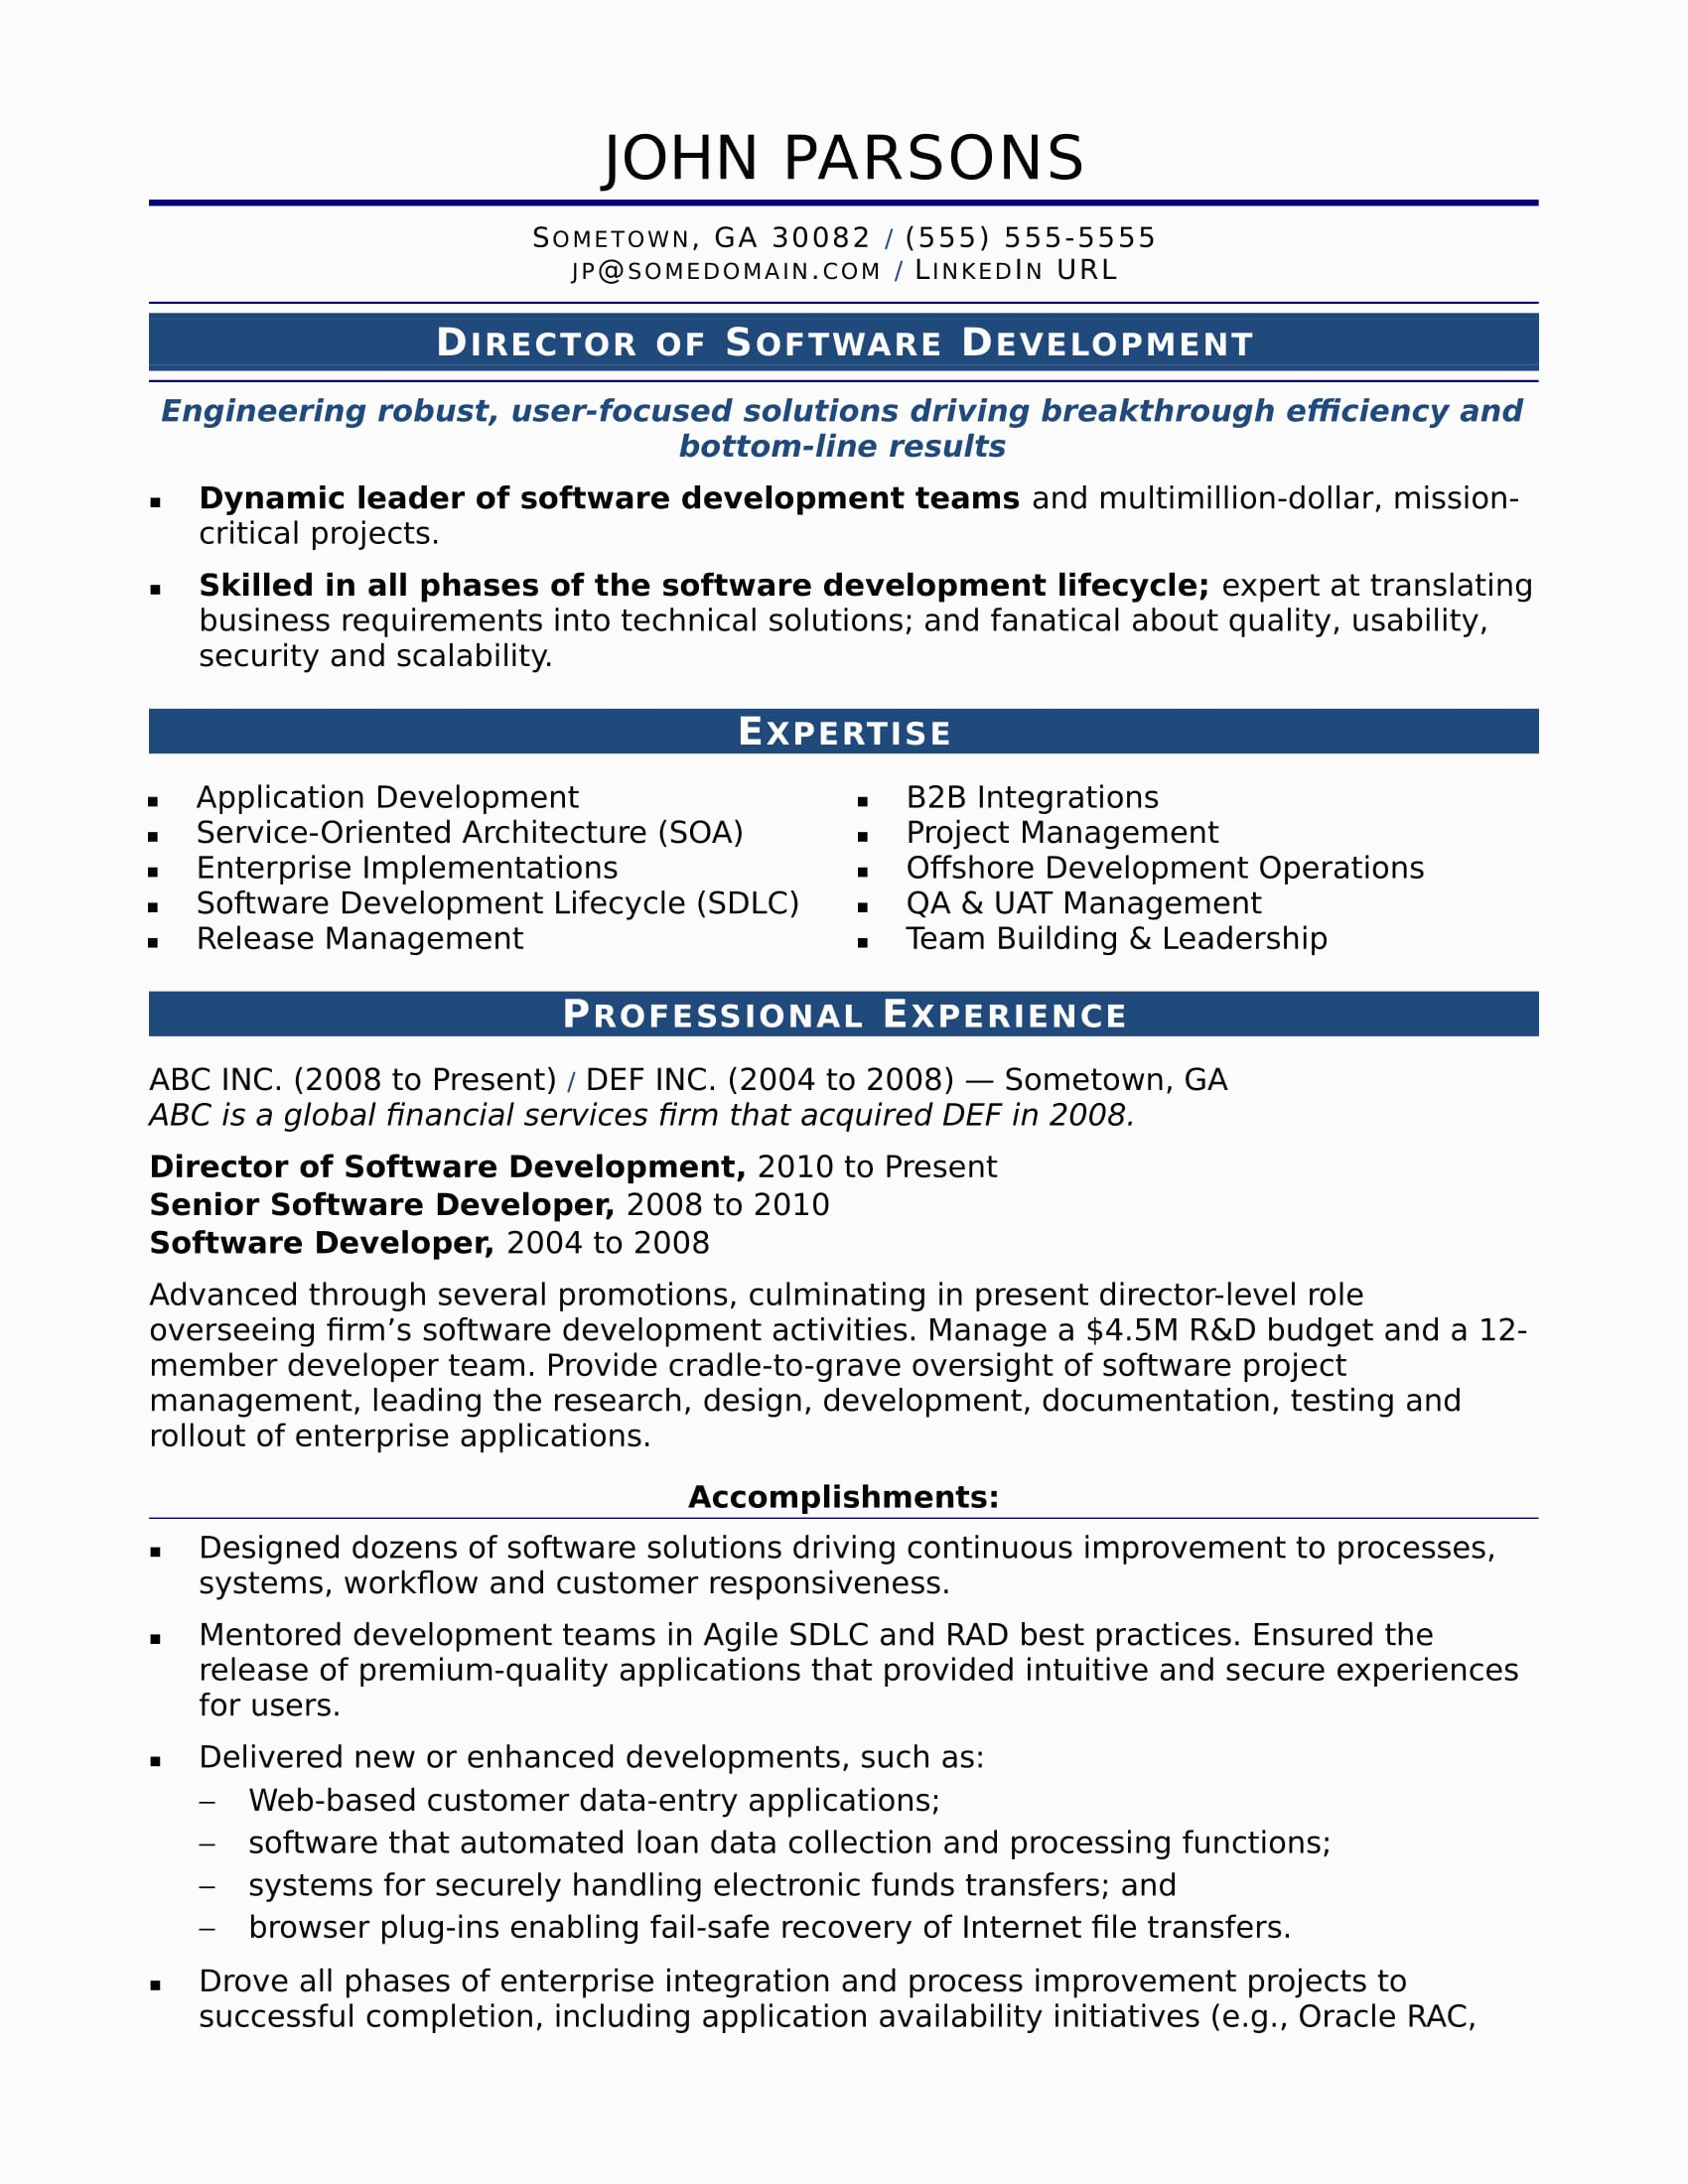 Sample Resume format for Experienced software Engineer Sample Resume for An Experienced It Developer